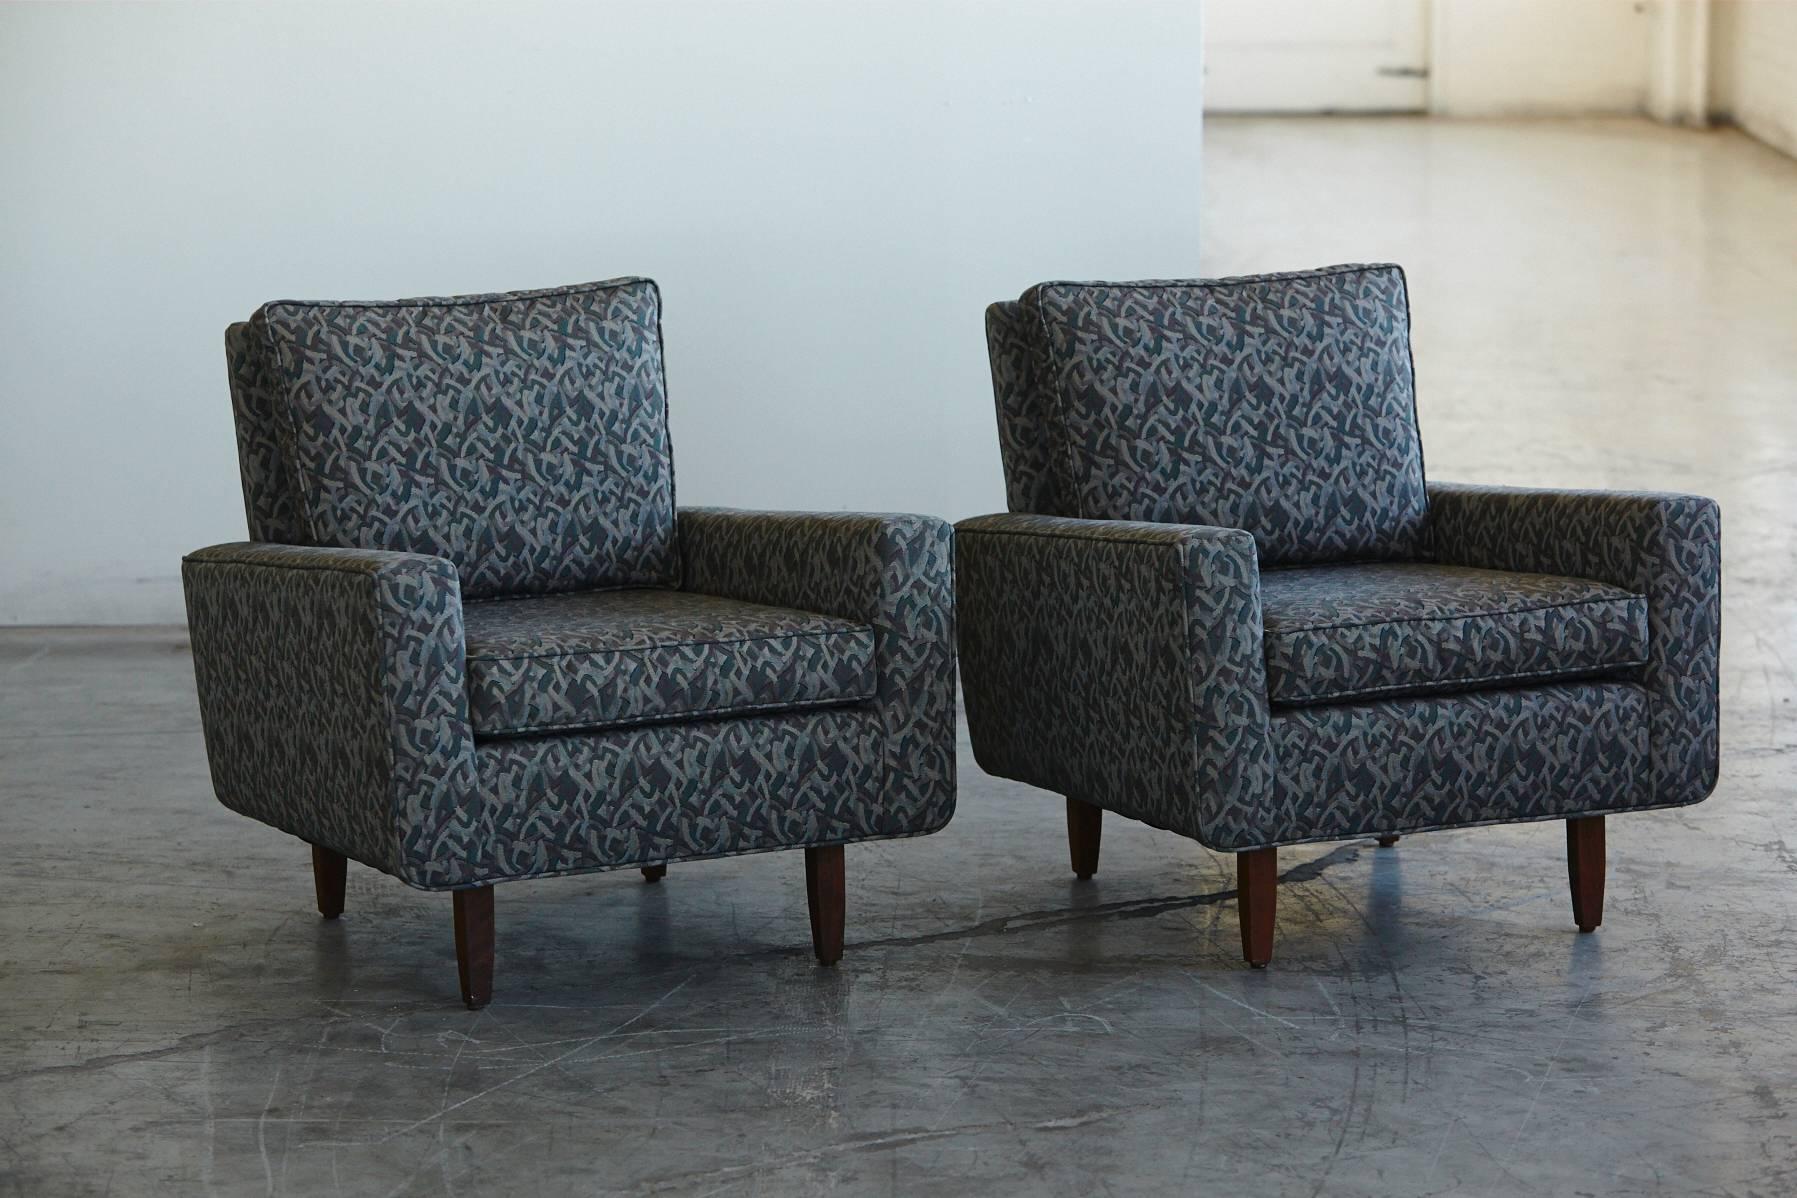 Beautiful pair of Florence Knoll lounge chairs from 1967. A copy of the original Knoll Associates order form dating 05/16/1967 will be included. The lounge chairs have been completely stripped down and reupholstered by Knoll with Knoll Textiles in